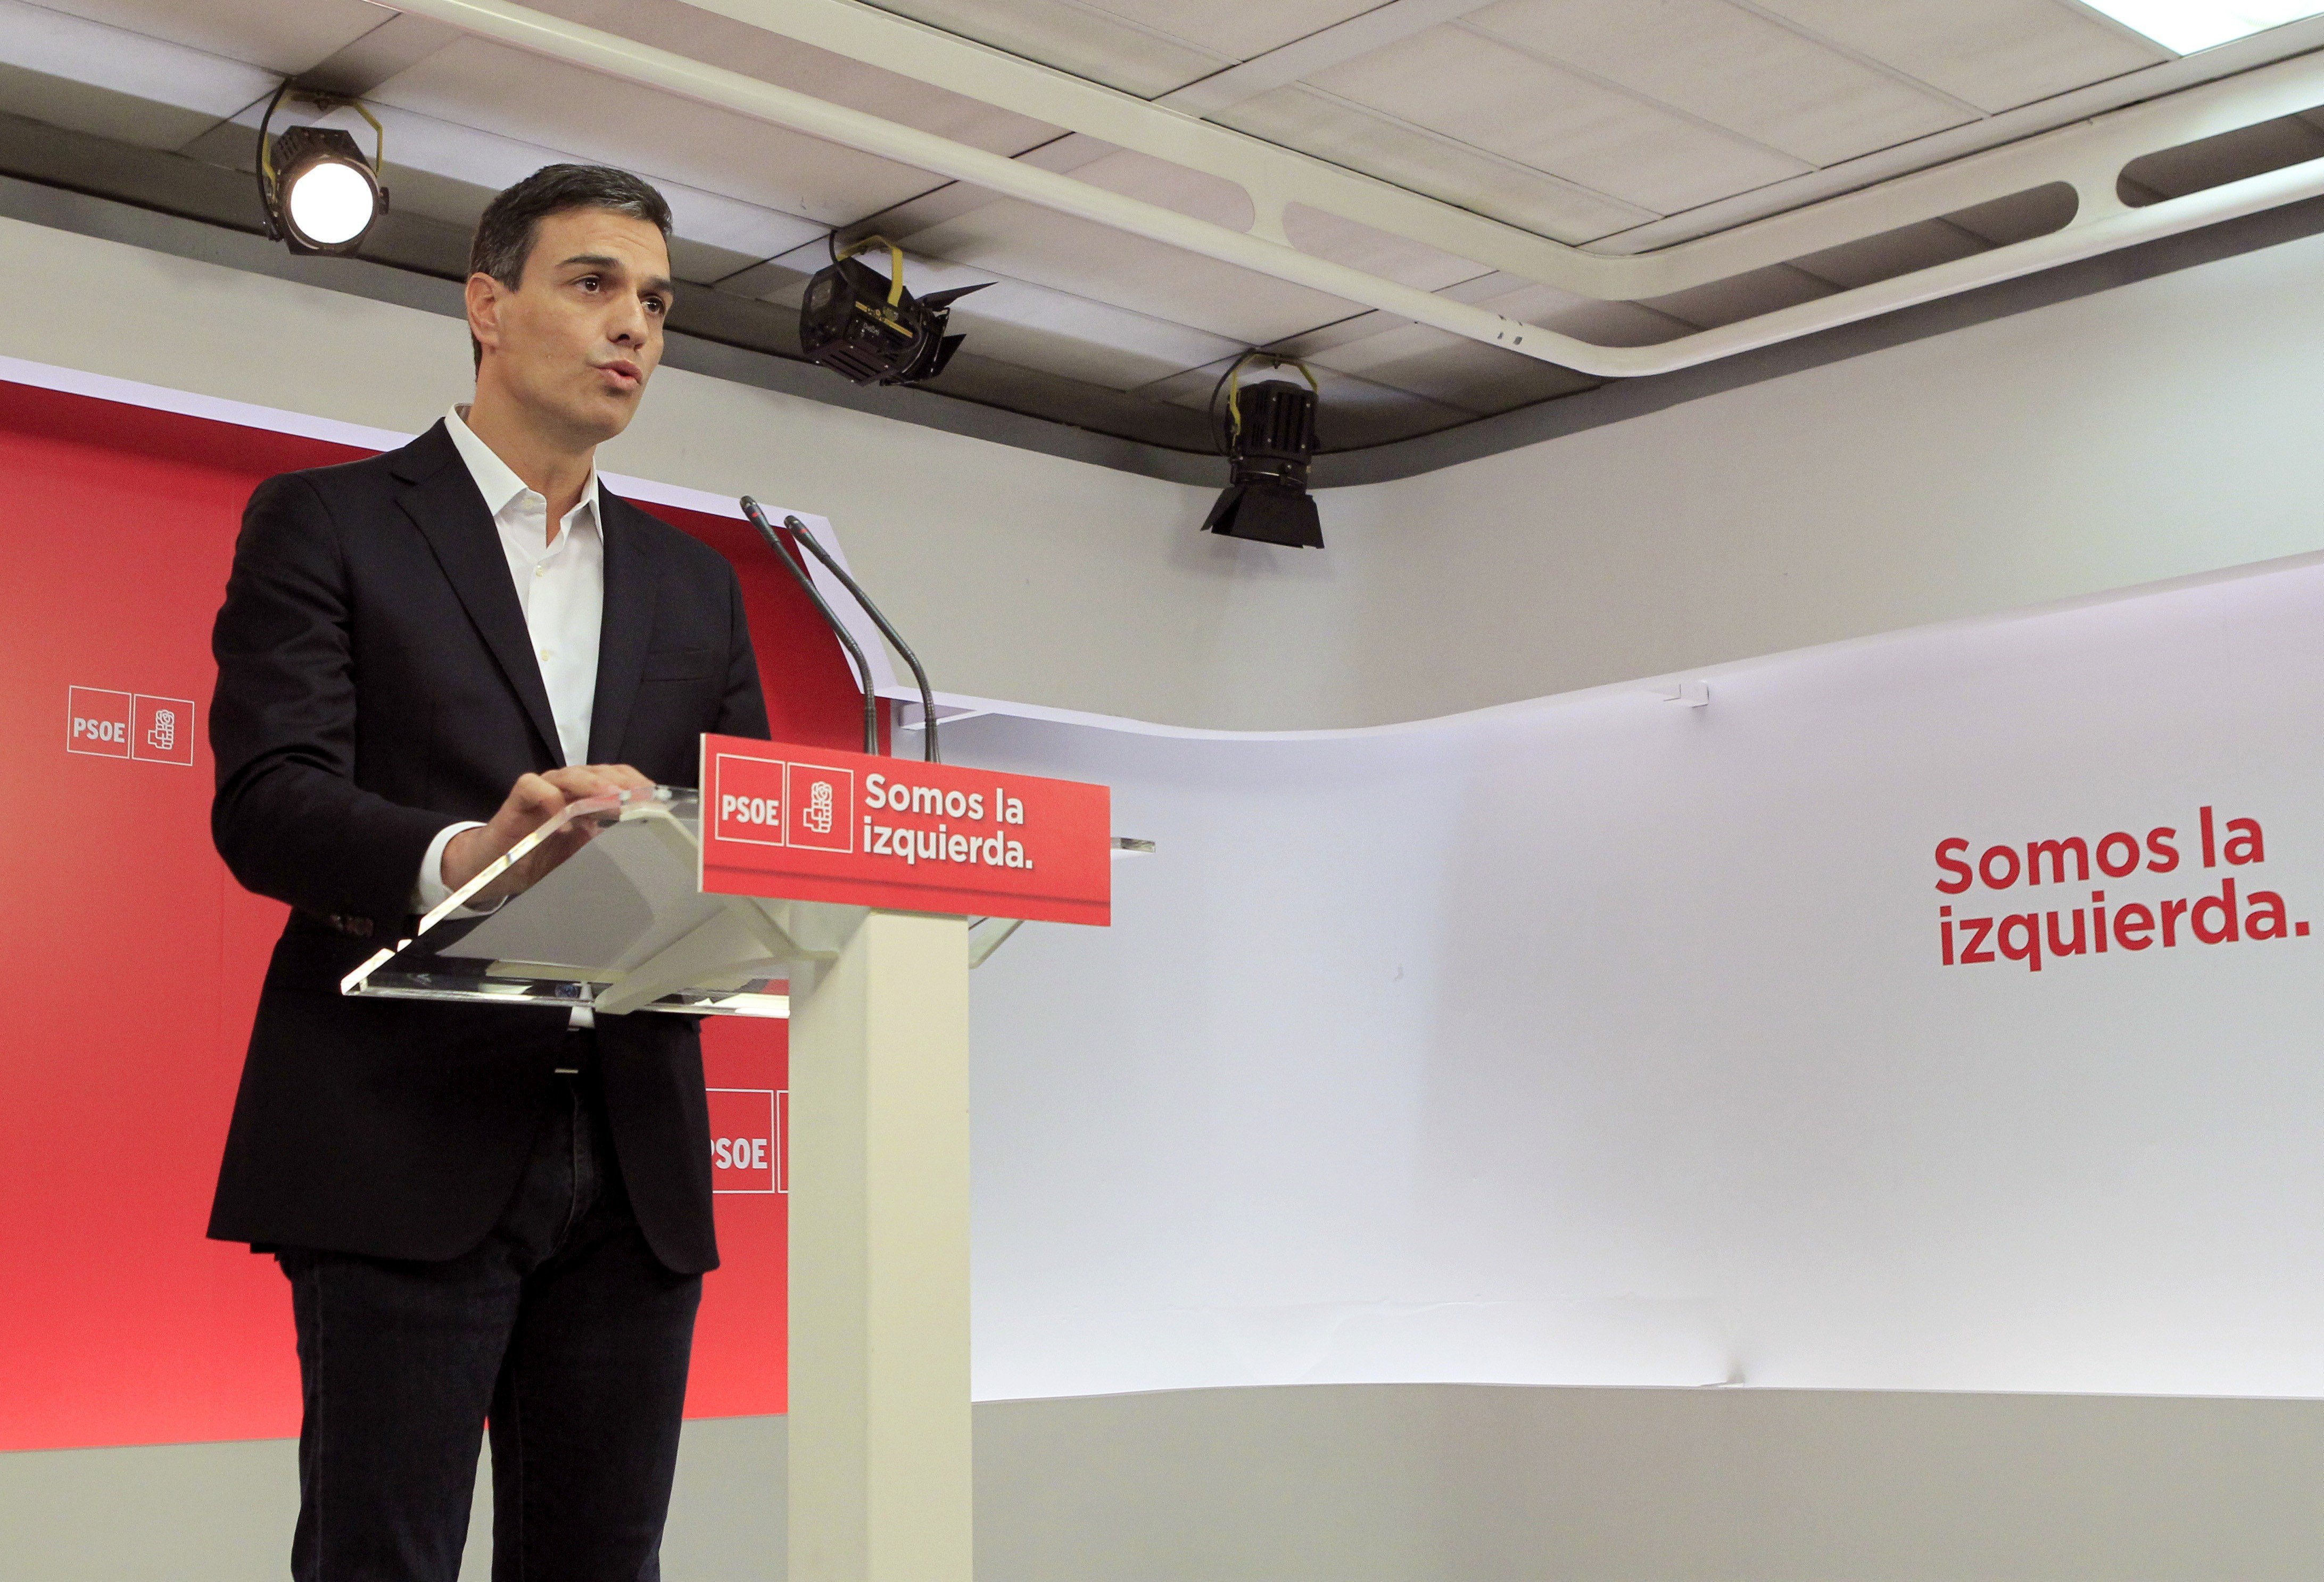 The PSOE asks for the immediate resignation of Mariano Rajoy